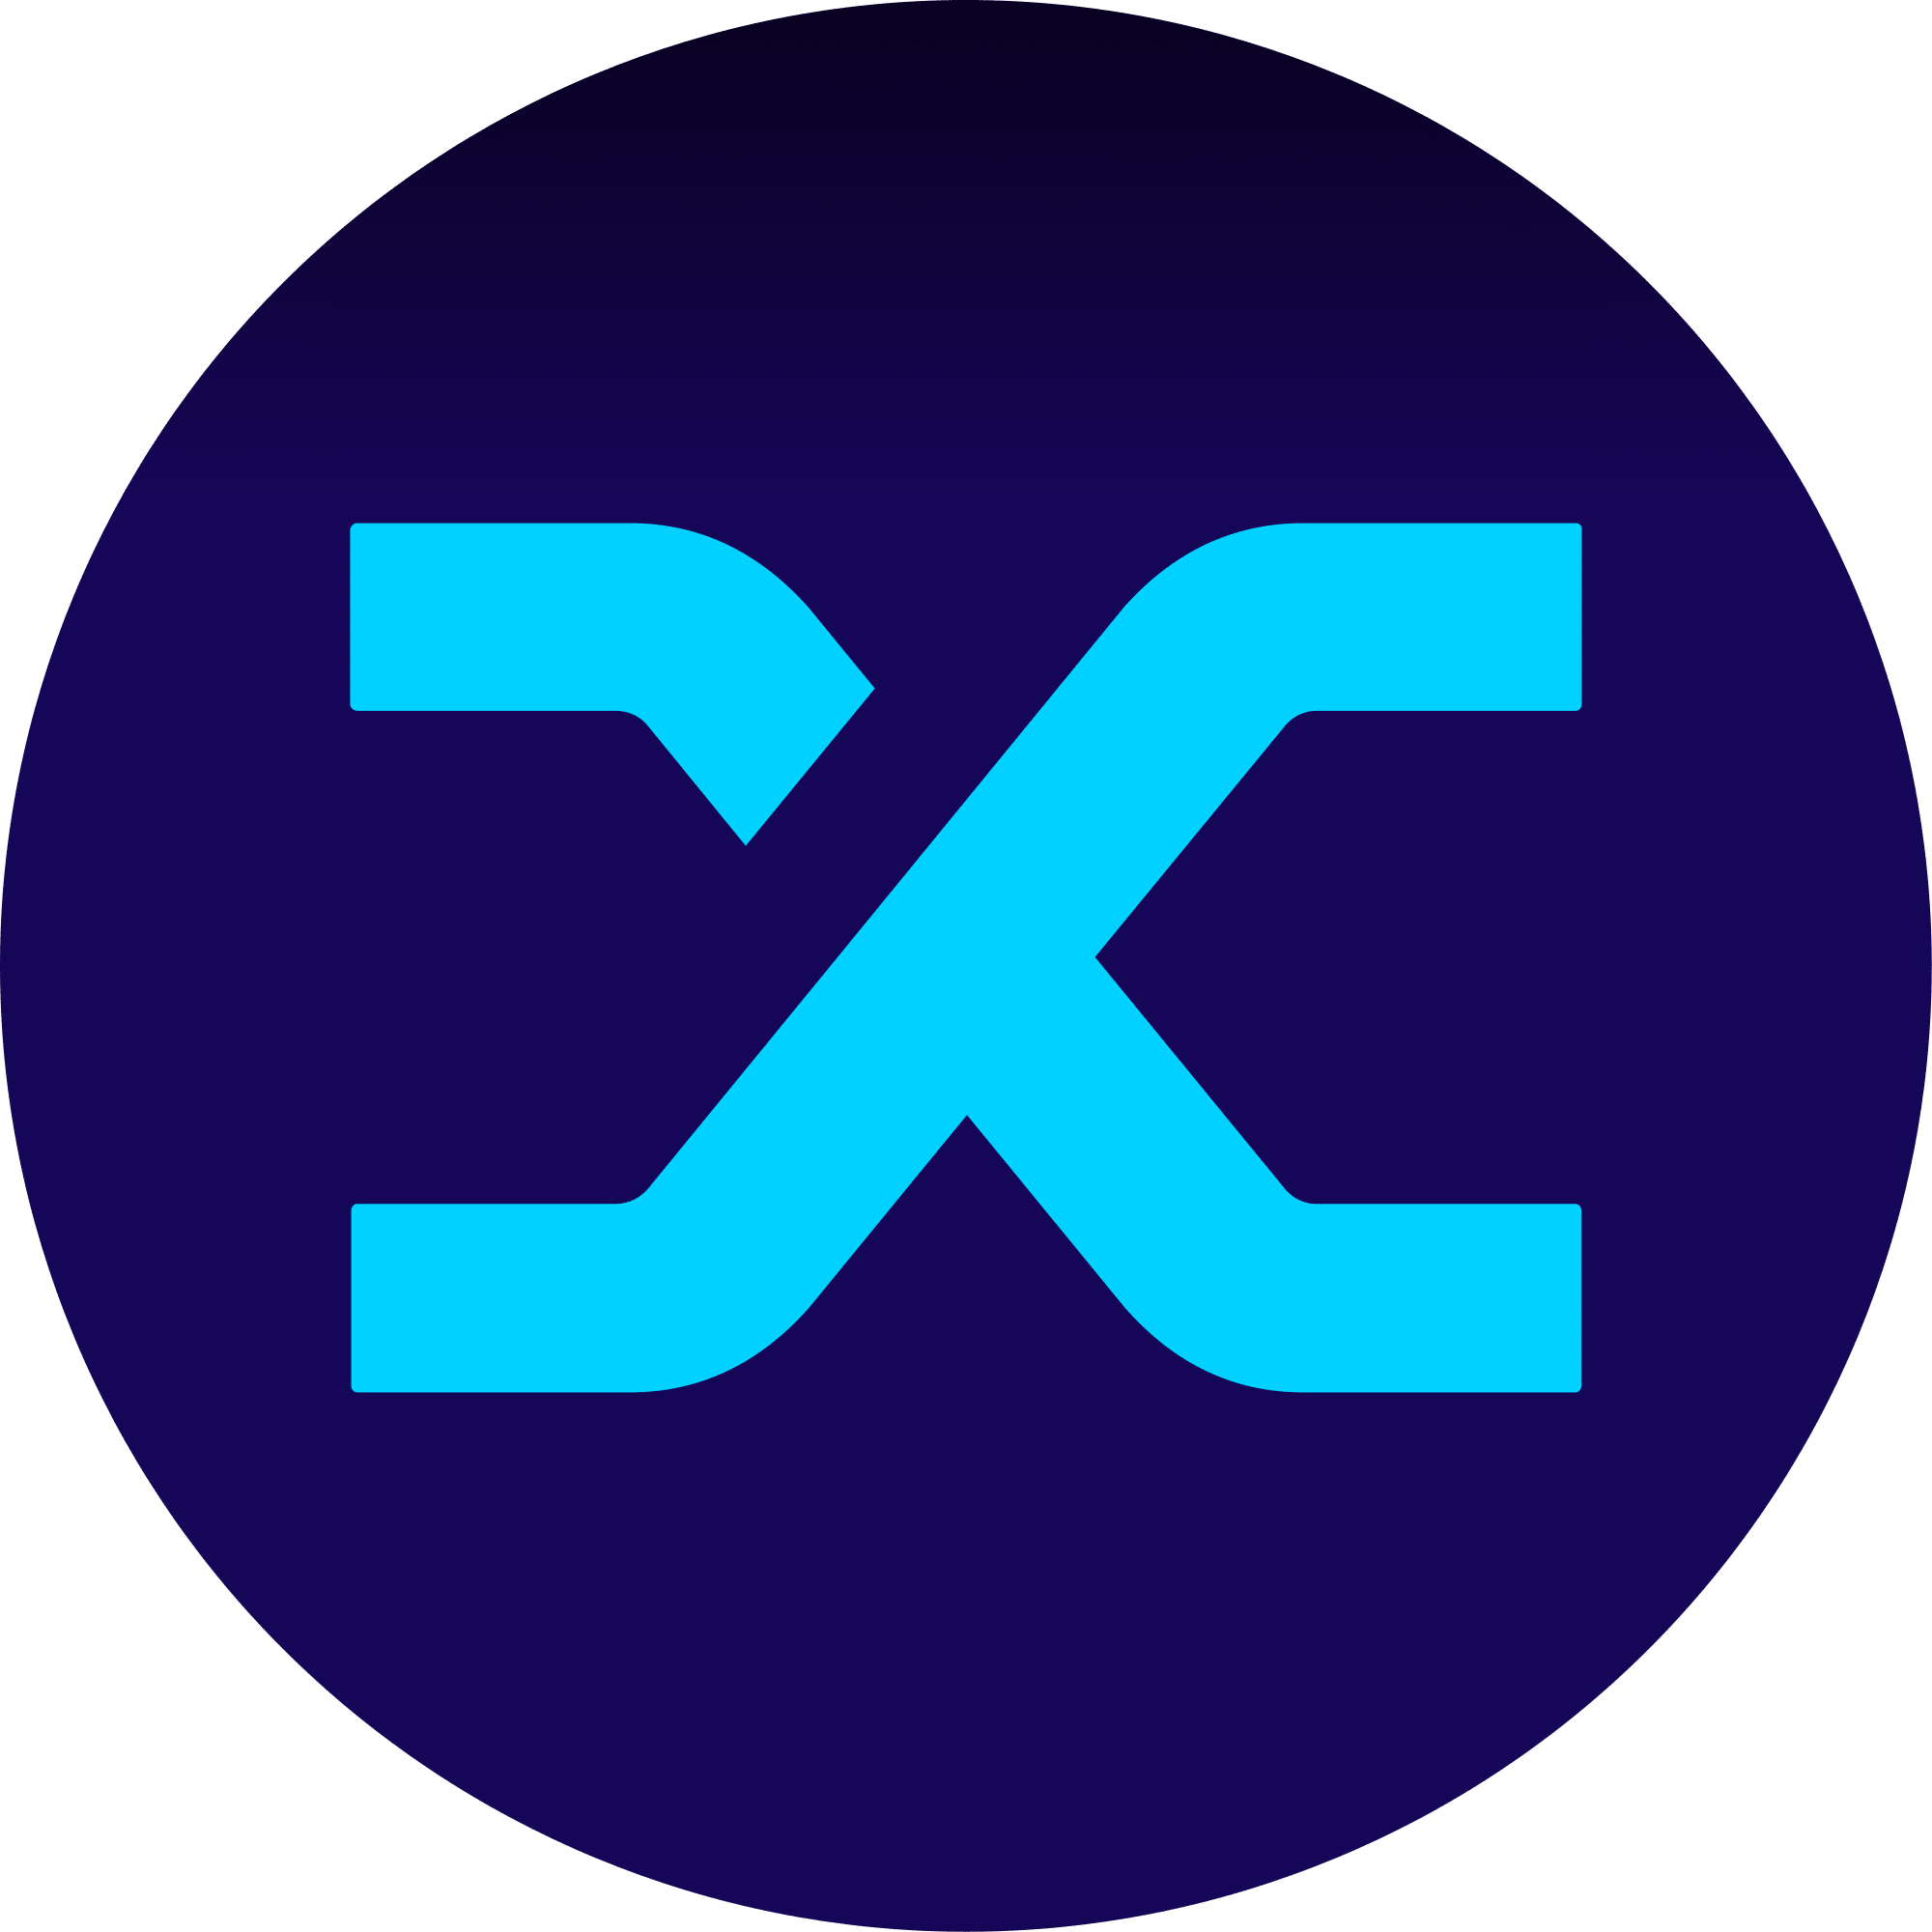 Next Cryptocurrency to Explode Monday, February 12 – Synthetix, Axie Infinity, MultiversX